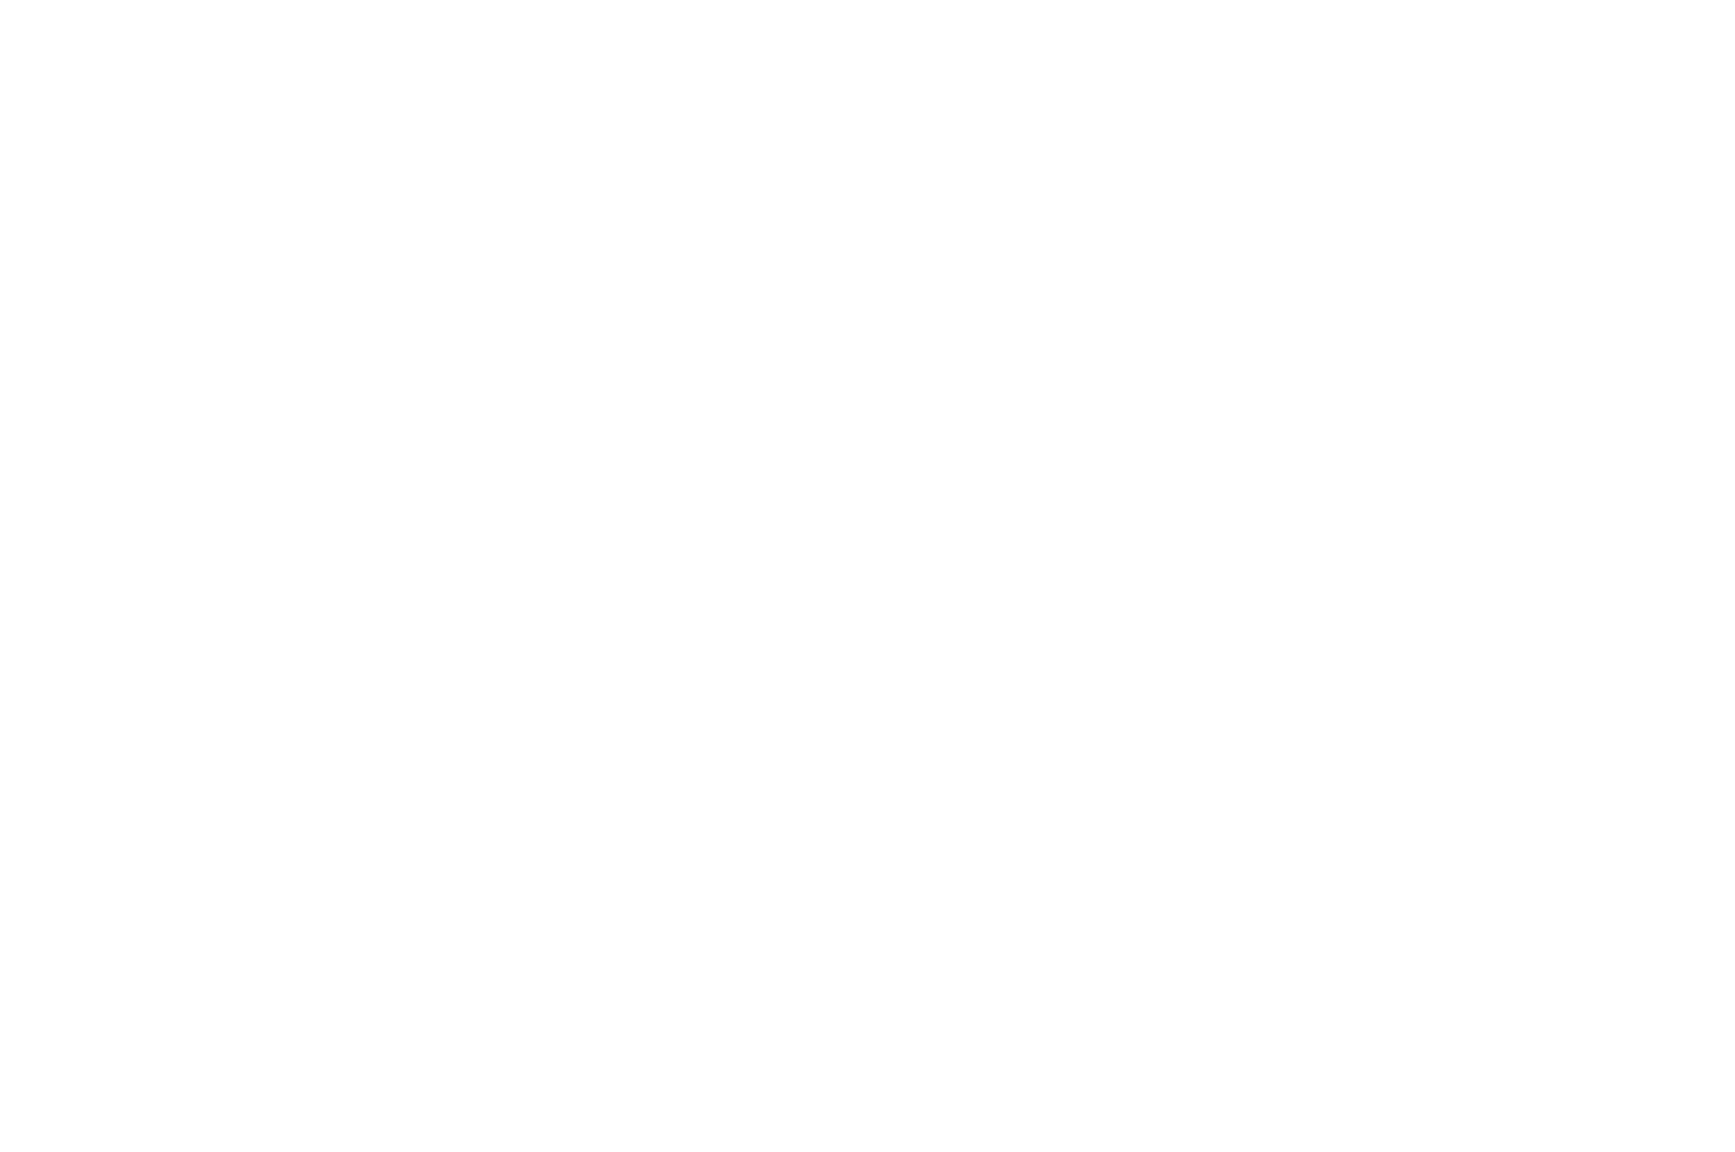 OFFICIAL SELECTION BEST PRODUCER - IndieX Film Fest - 2020 (1).png